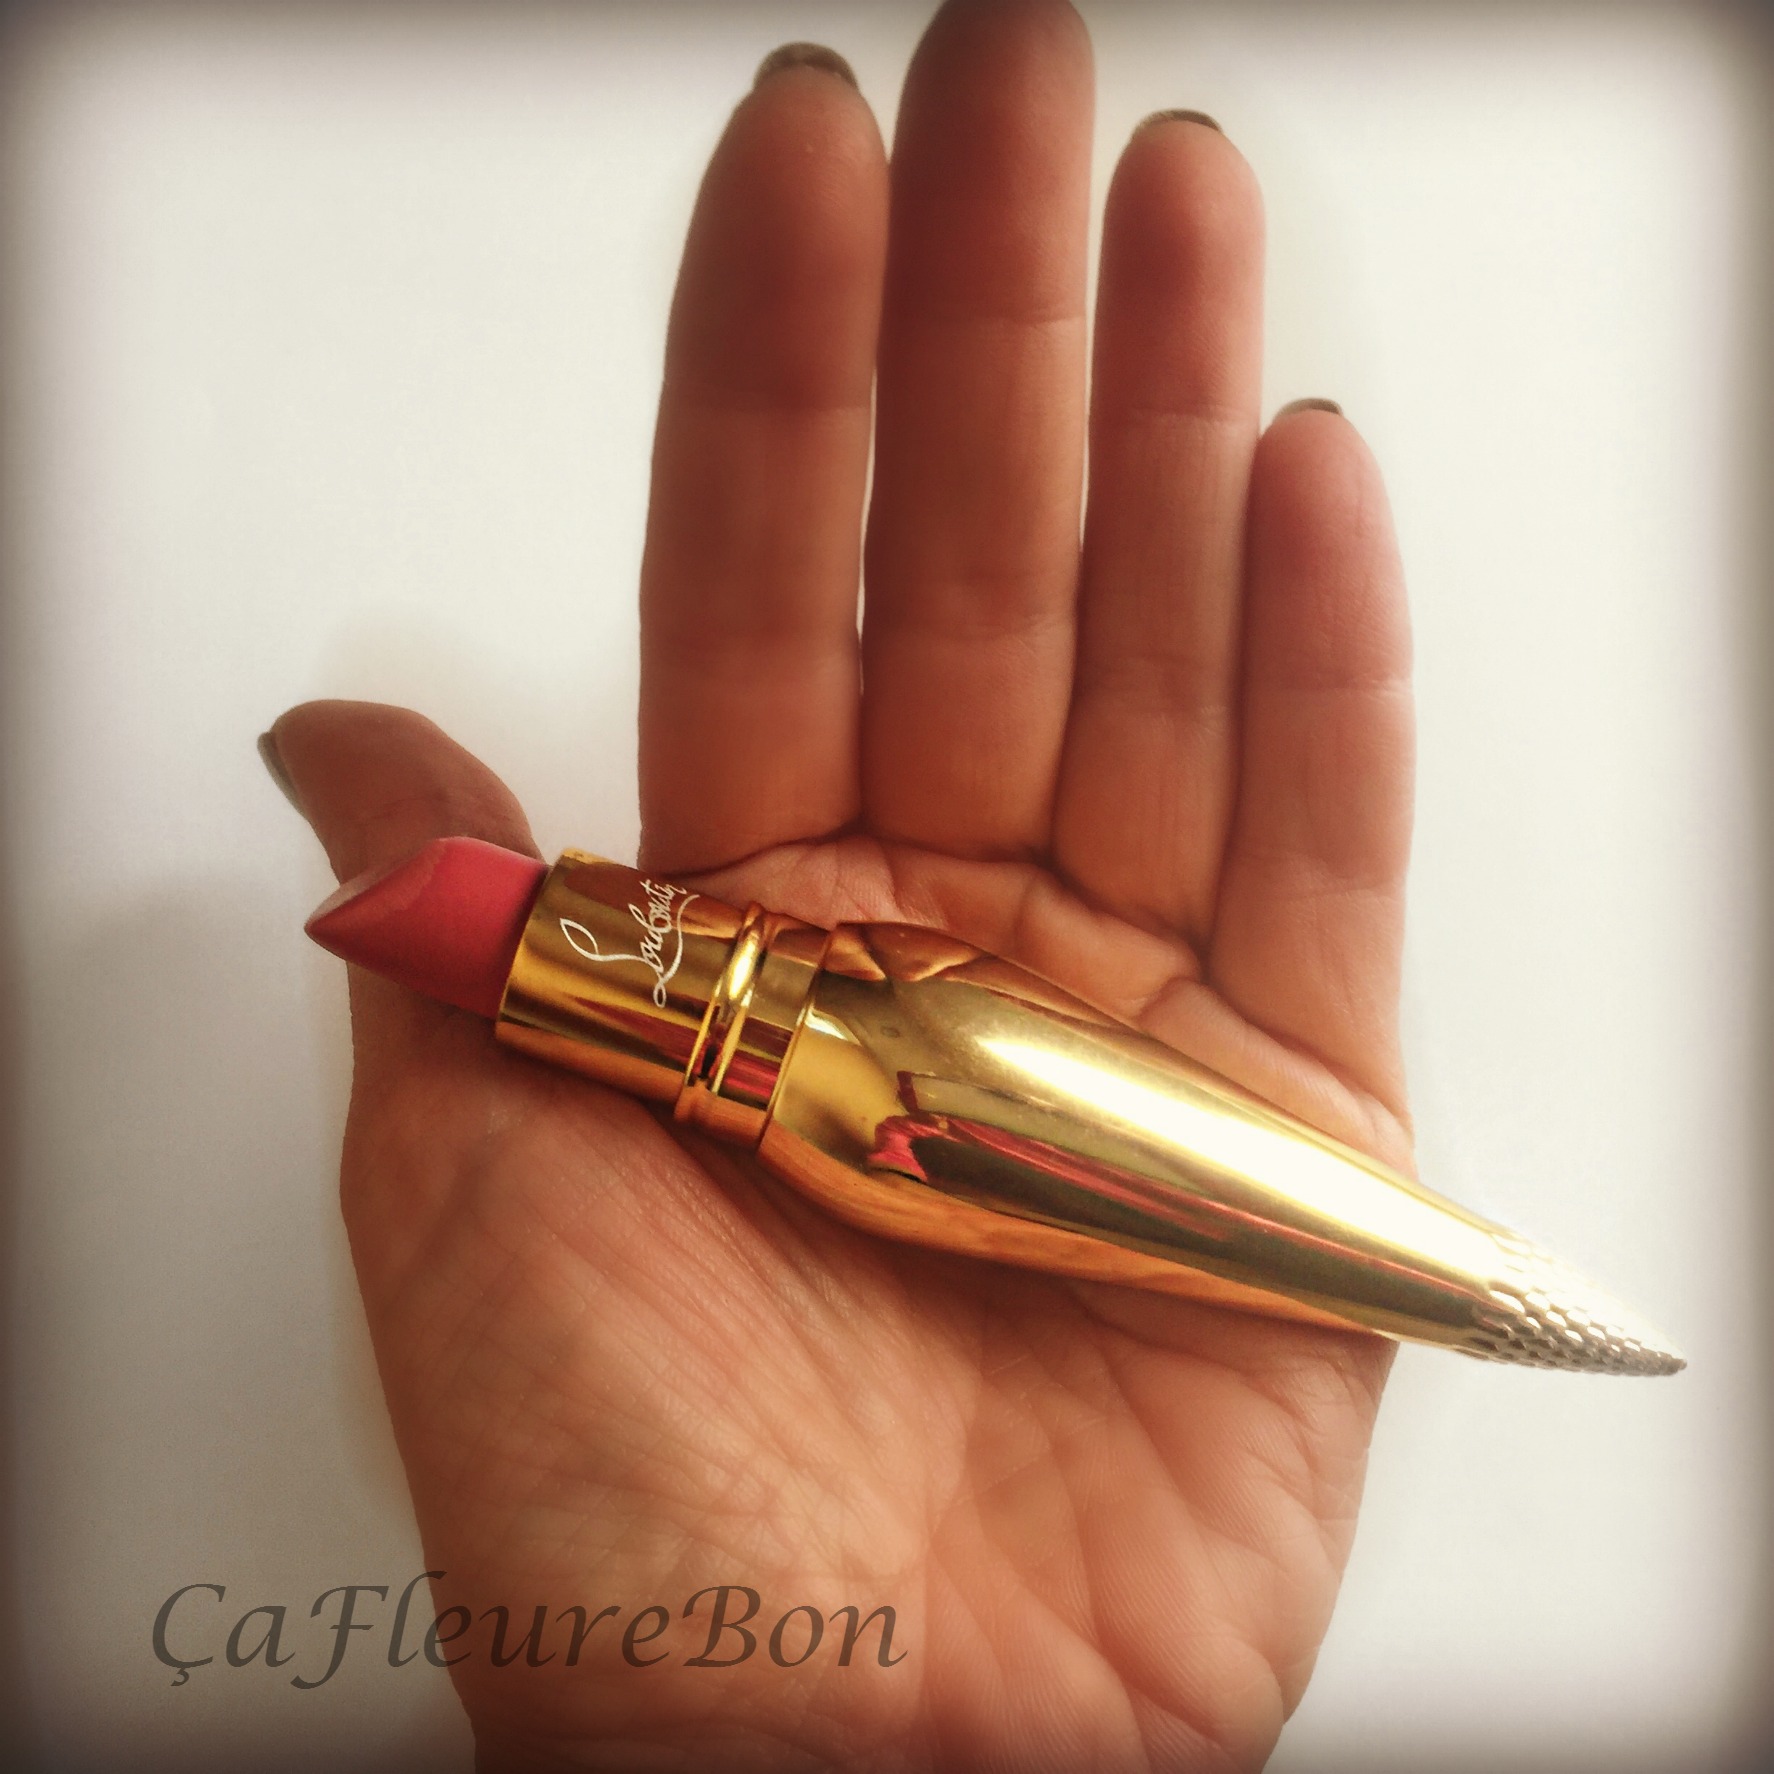 ♡ Christian Louboutin Lipstick in 'Bikini', Swatches and Review ♡